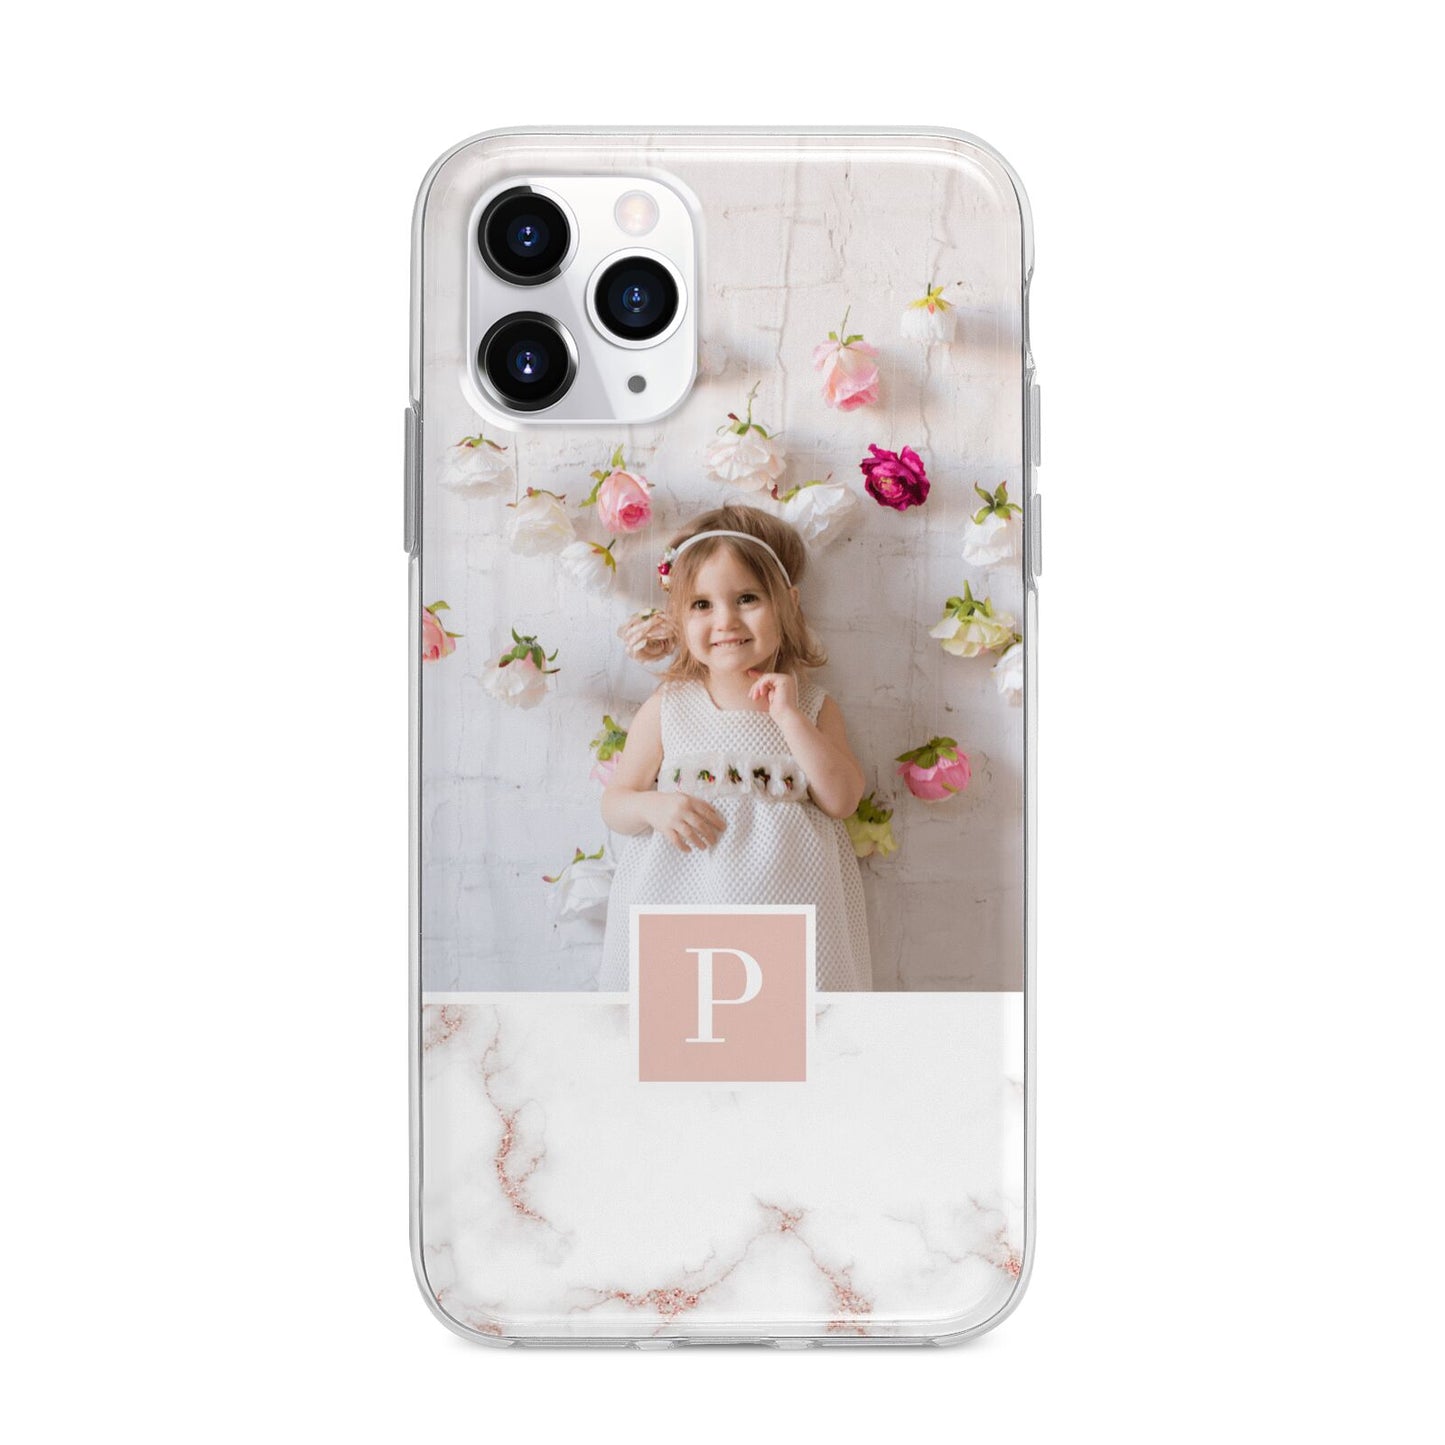 Monogram Marble Photo Upload Apple iPhone 11 Pro Max in Silver with Bumper Case